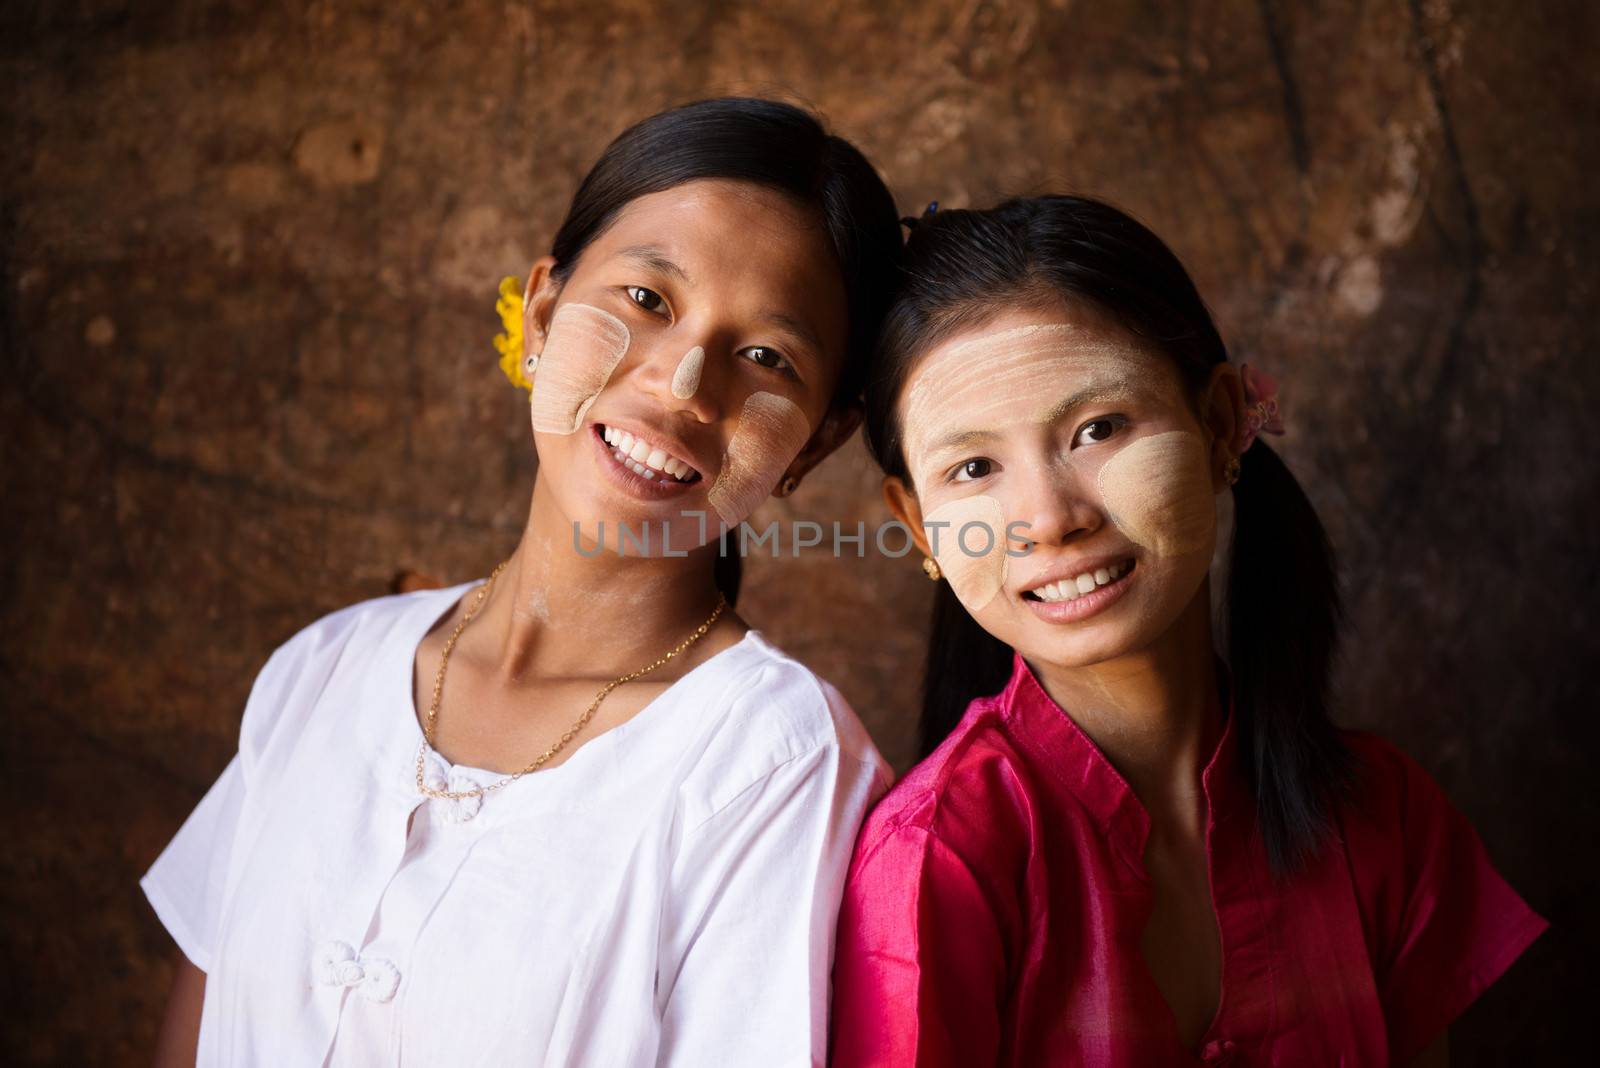 Portrait of two beautiful young traditional Myanmar girls smiling together.